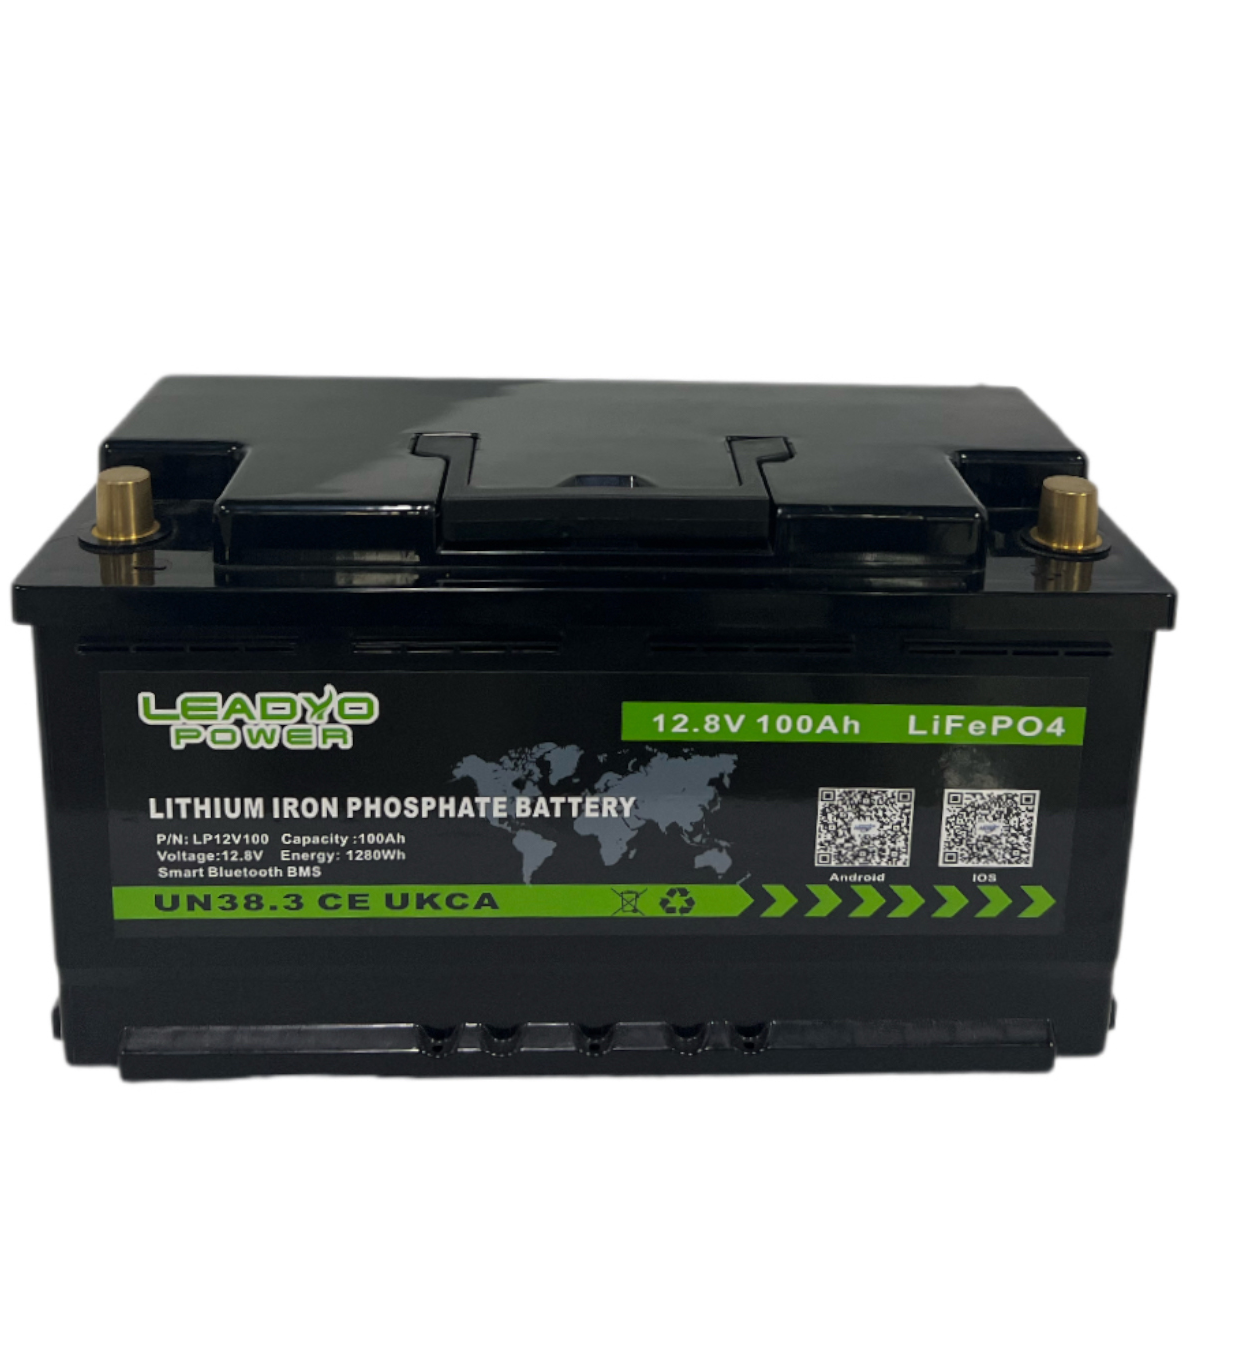 Leadyo Power: Leading the Way in Lithium RV Battery Technology